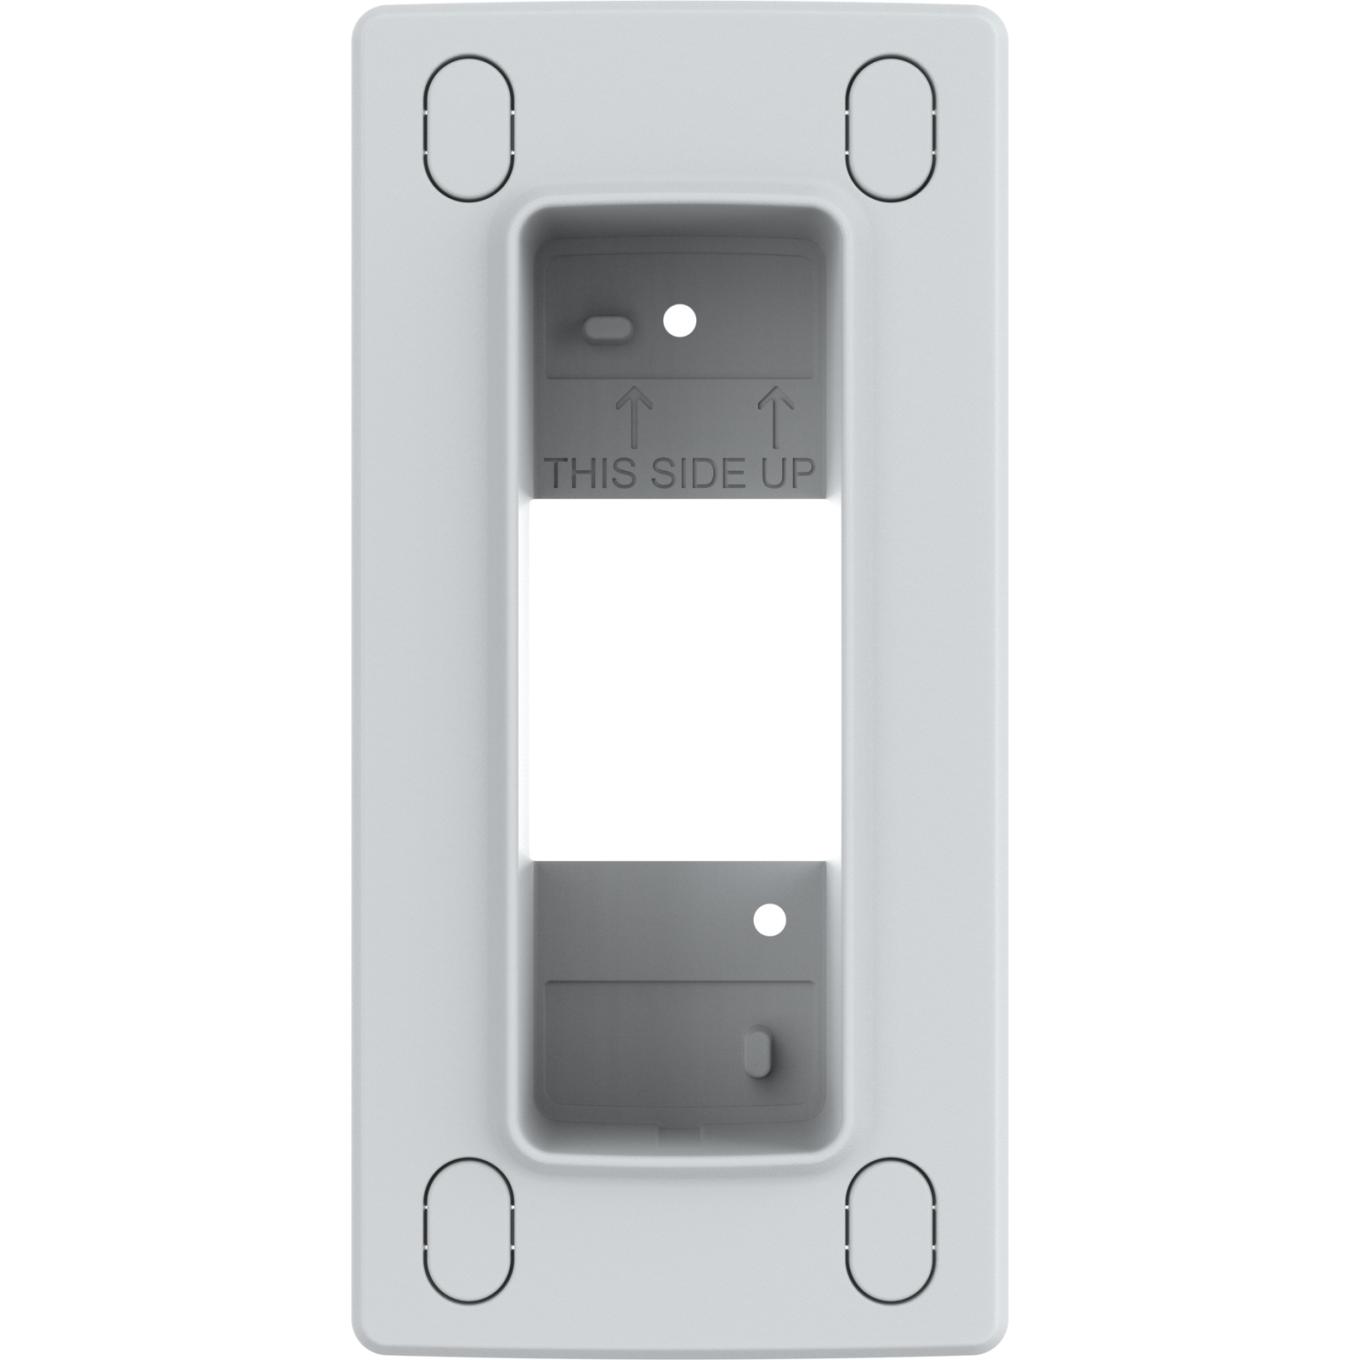 AXIS TI8204 Recessed Mount | Axis Communications